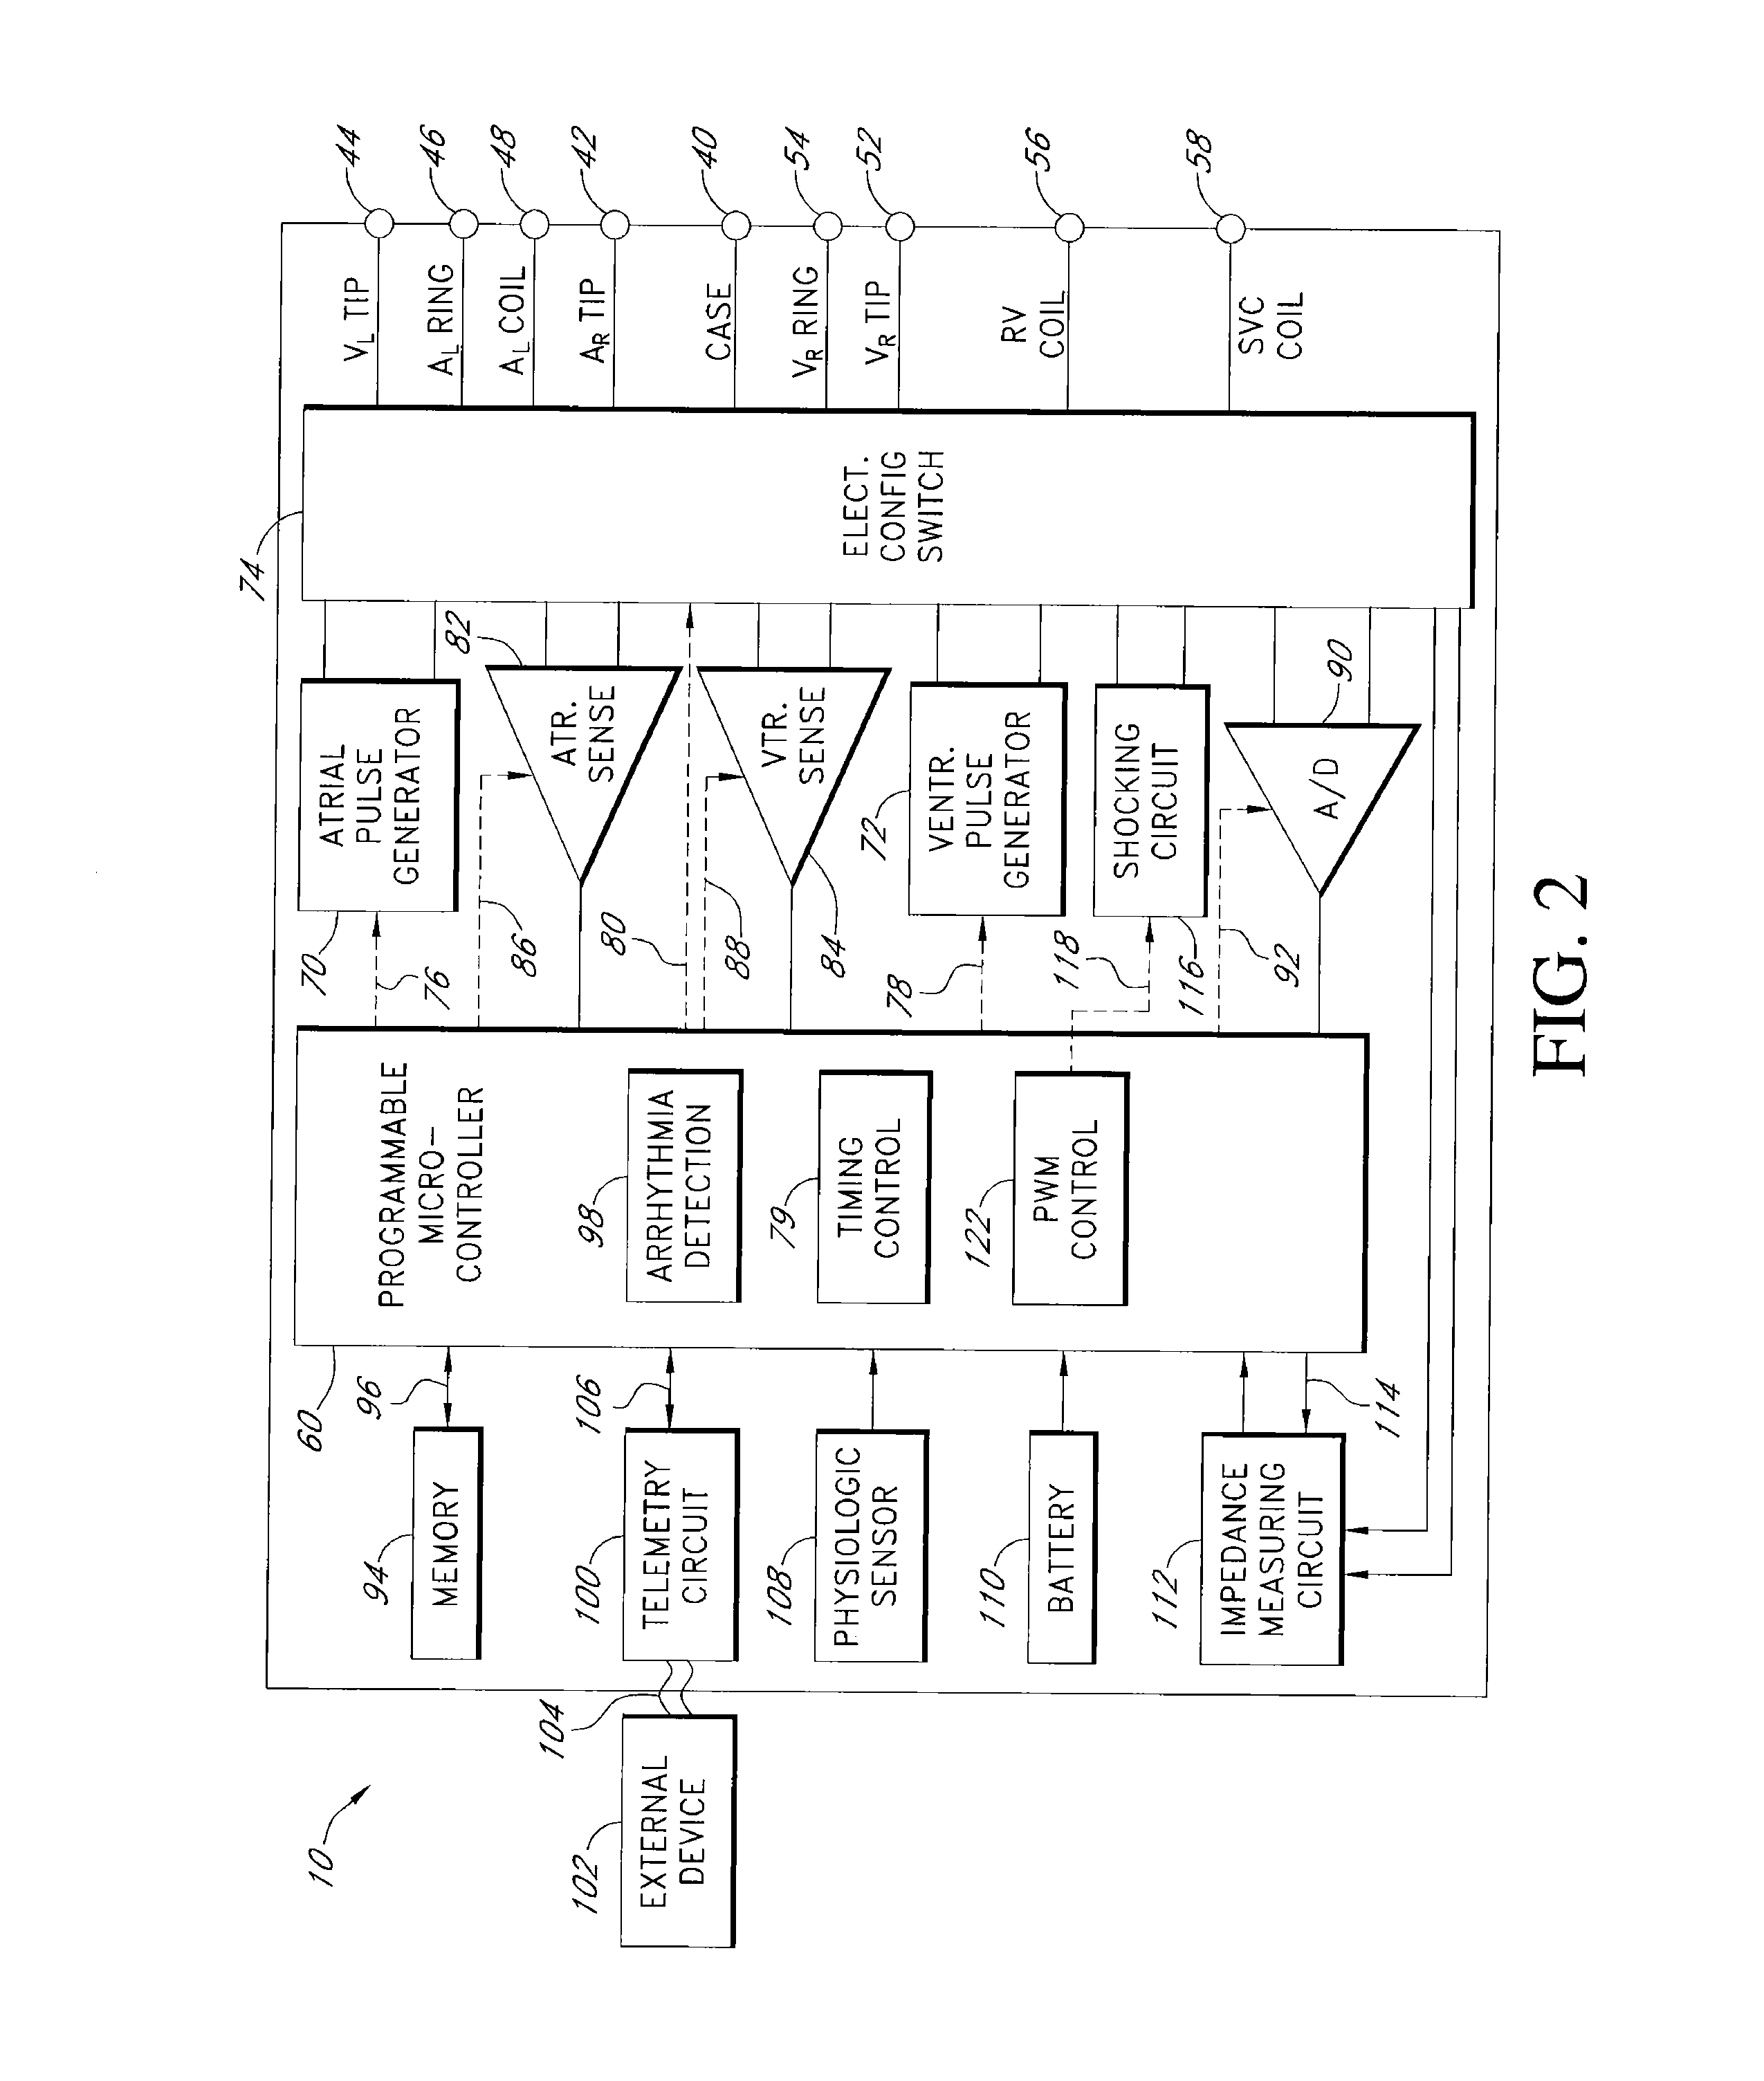 System to create arbitrary waveforms using an external inductor and an implantable medical device